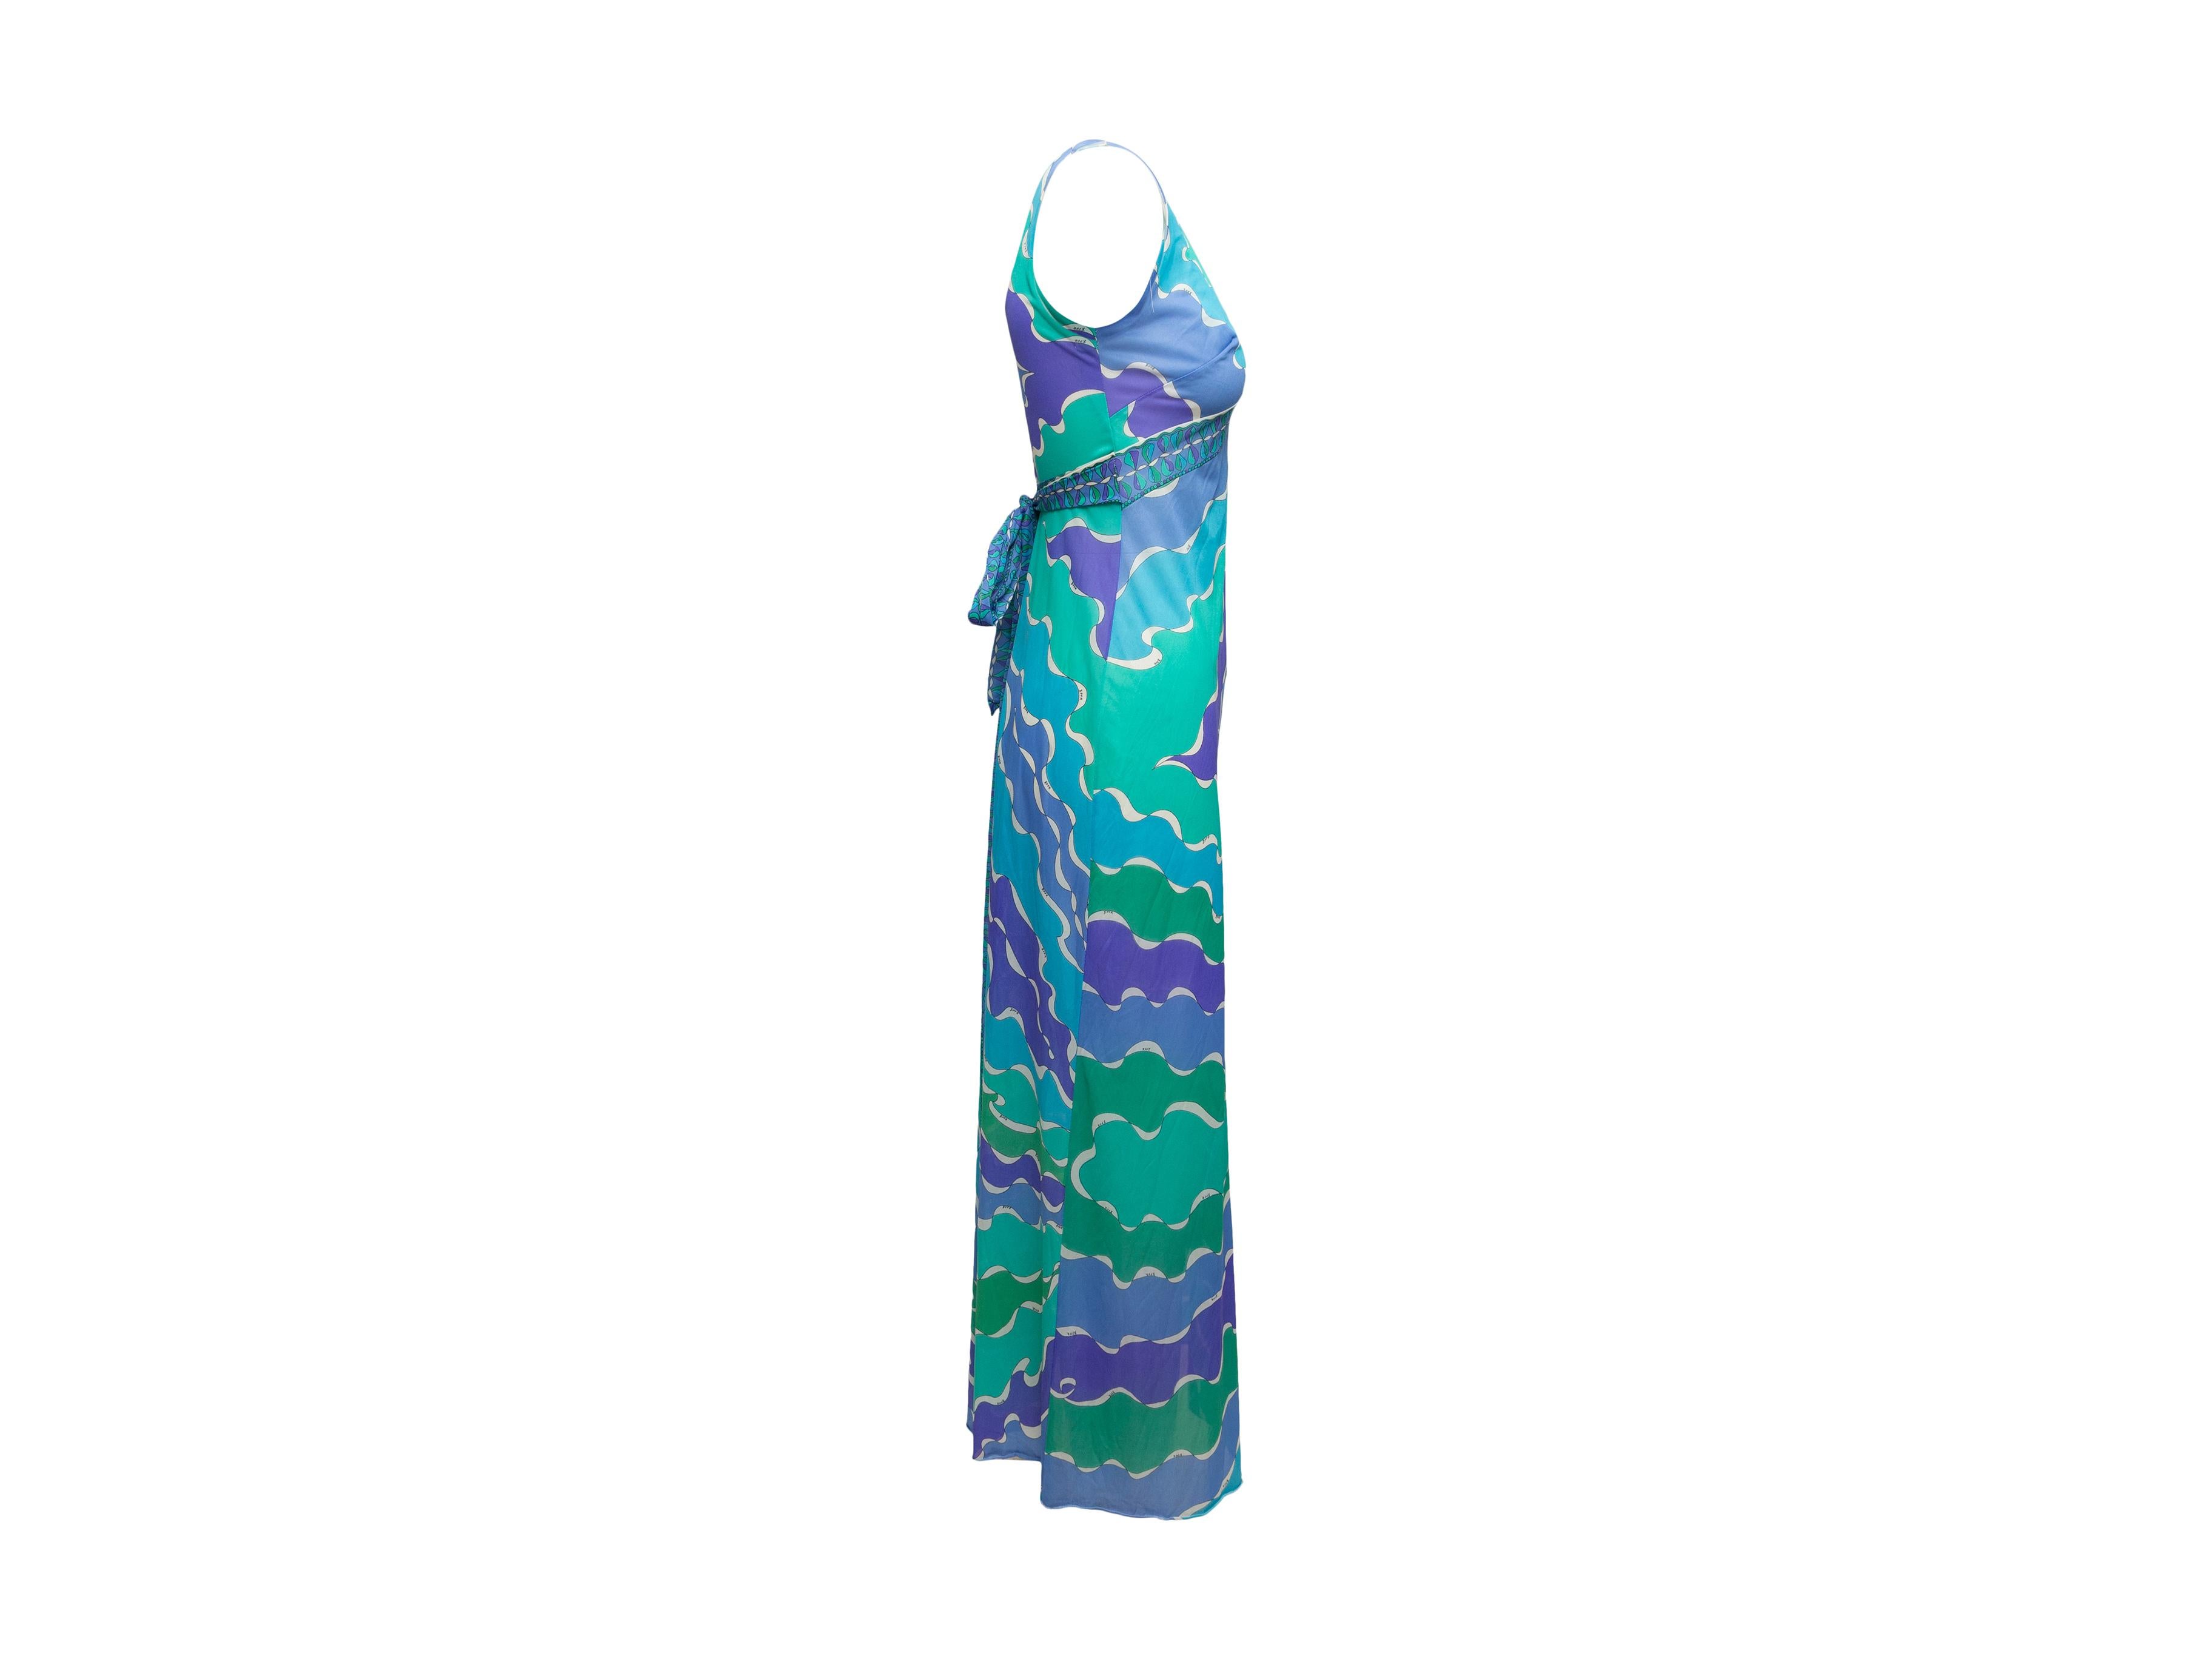 Product details: Vintage turquoise, green and purple sleeveless nightgown by Emilio Pucci. Abstract print throughout. Tie accent at back waist. 34